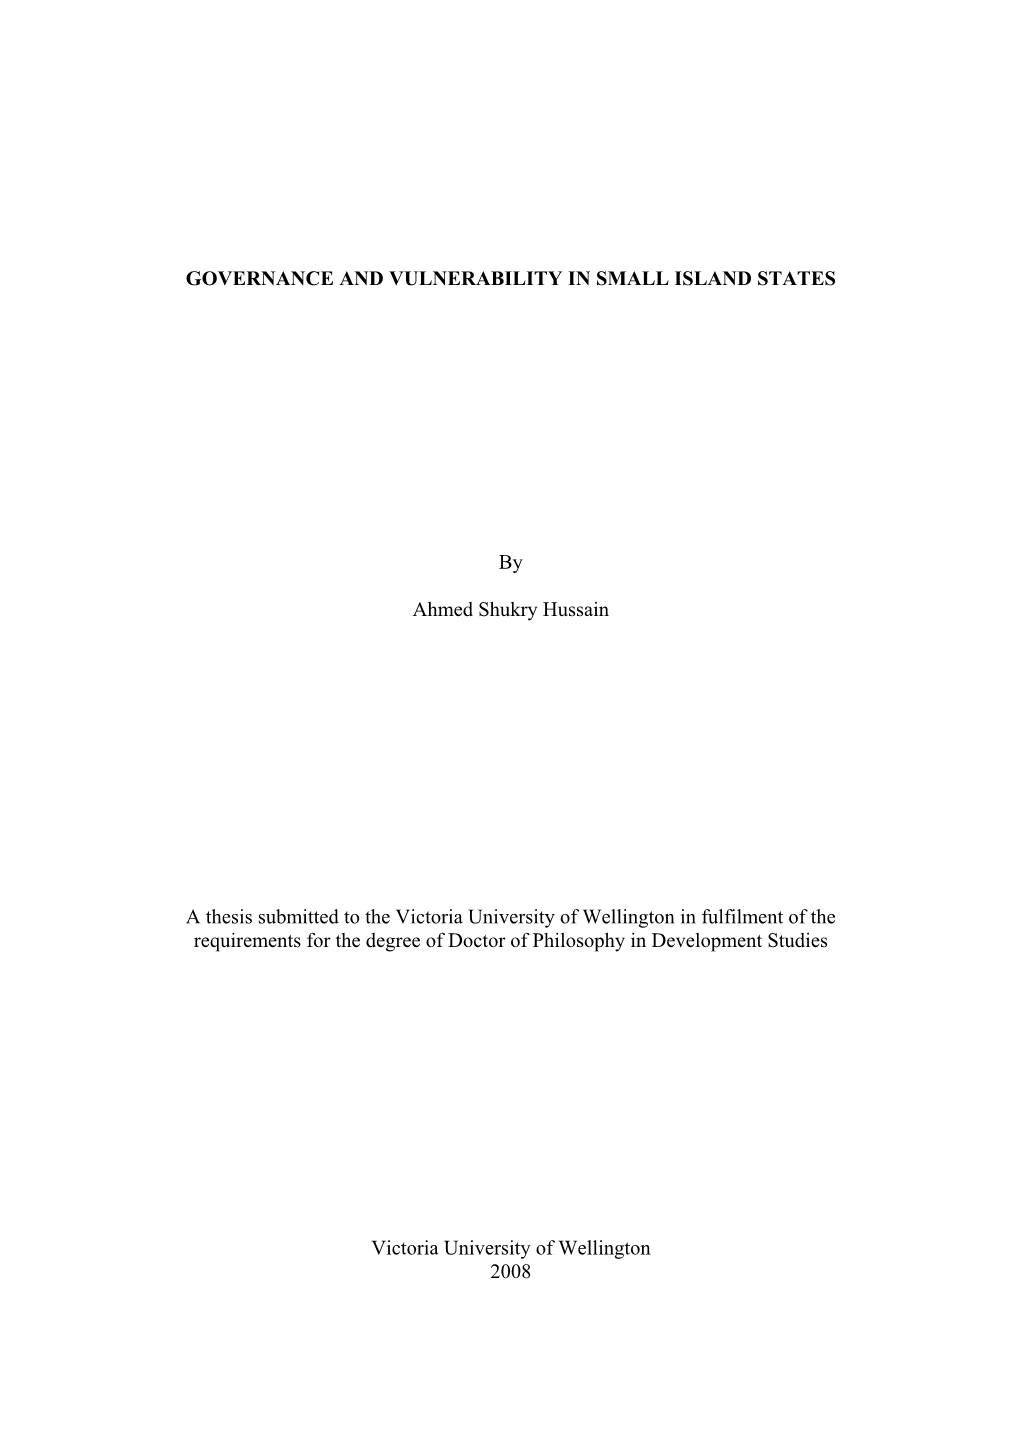 Governance and Vulnerability in Small Island States